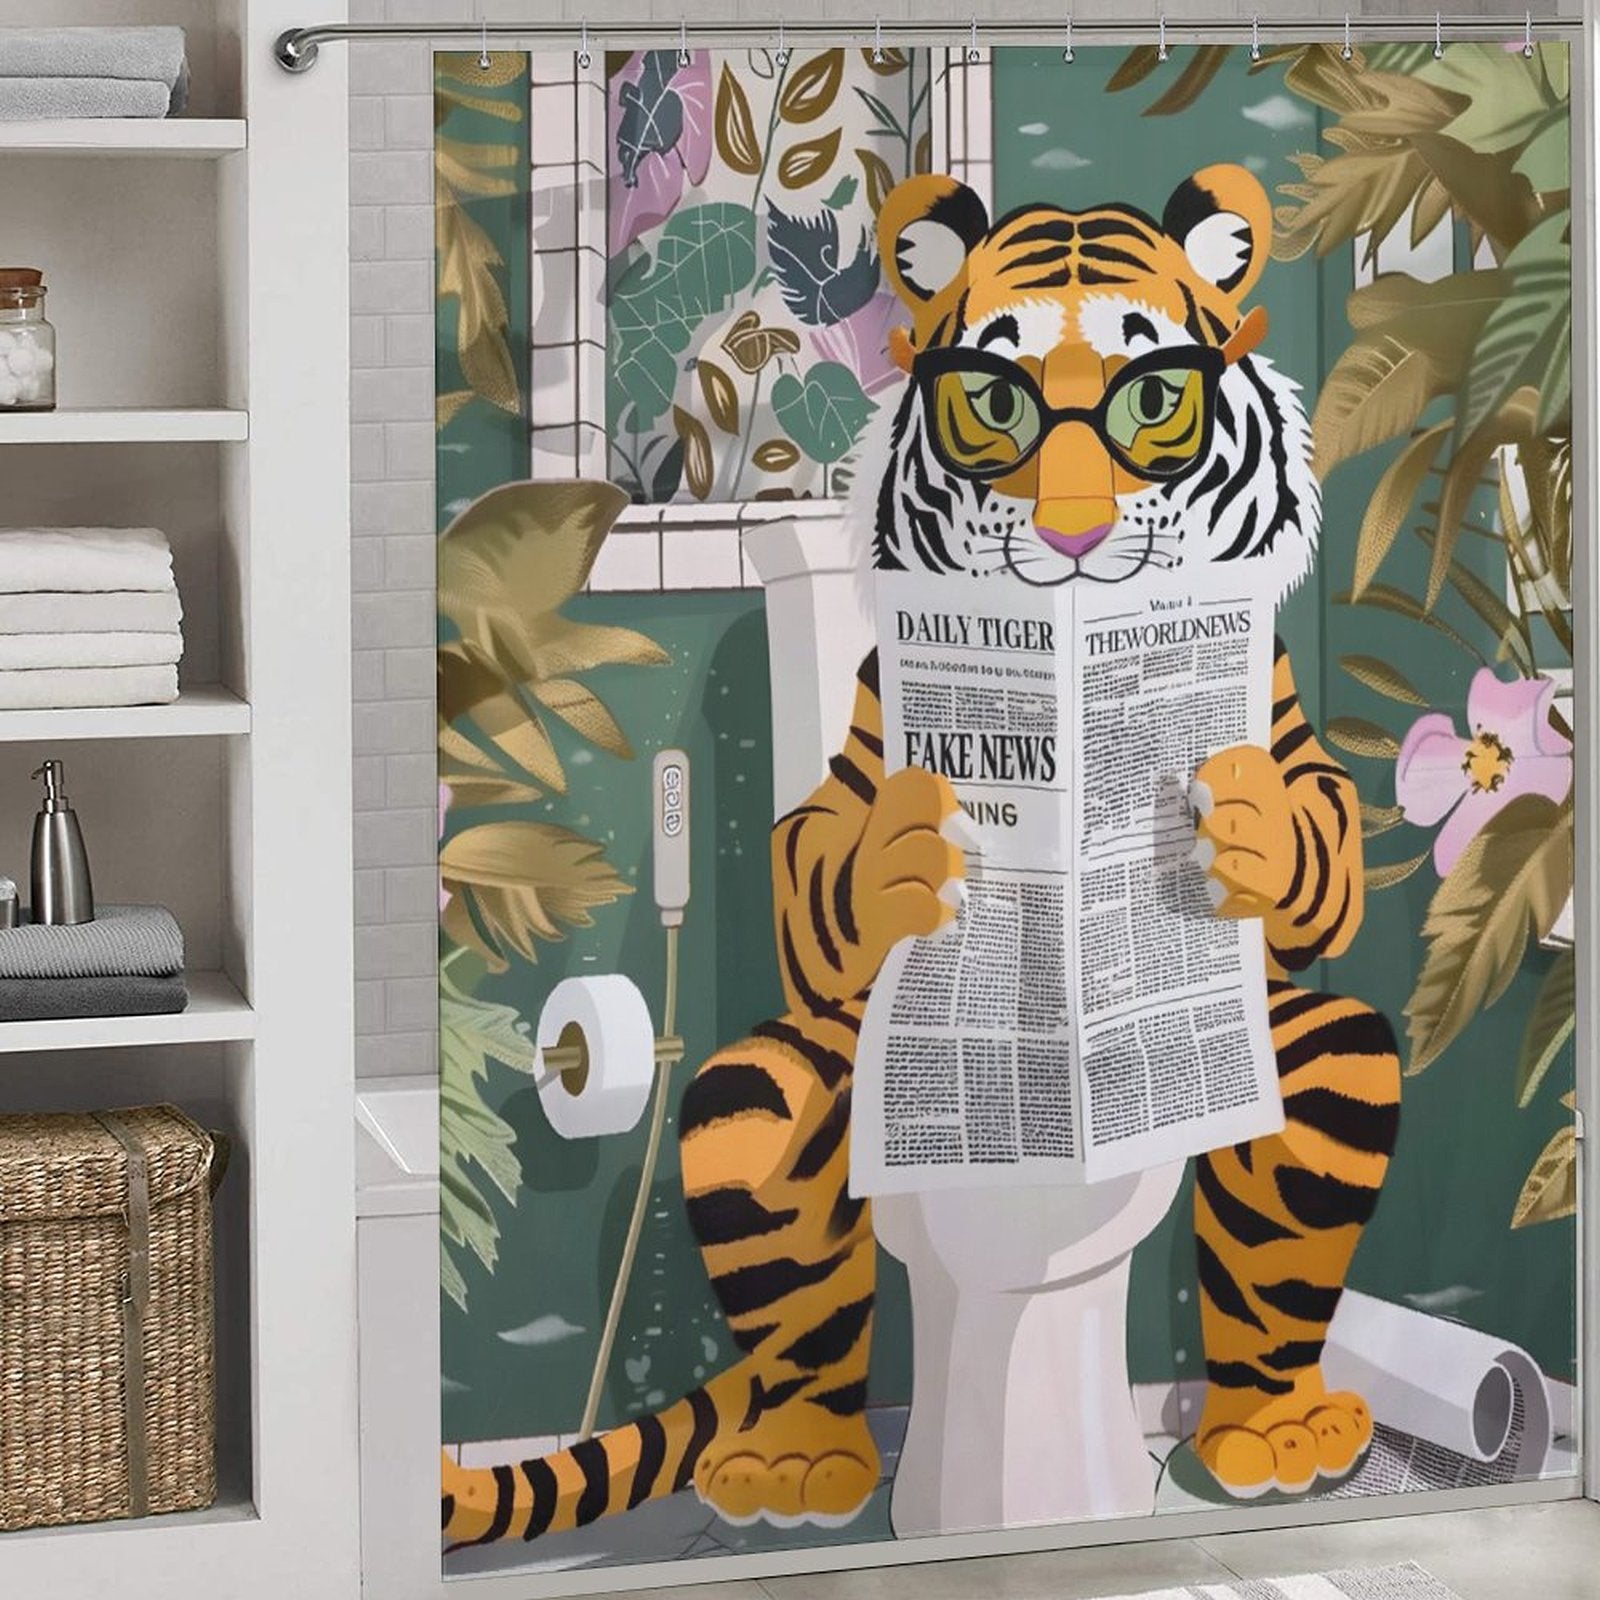 Introducing the Funny Cool Tiger Reading Shower Curtain-Cottoncat by Cotton Cat: a unique shower curtain featuring a tiger sitting on a toilet, reading a newspaper against a jungle-themed background. Made from waterproof fabric, this delightful design adds whimsy and charm to your bathroom decor.